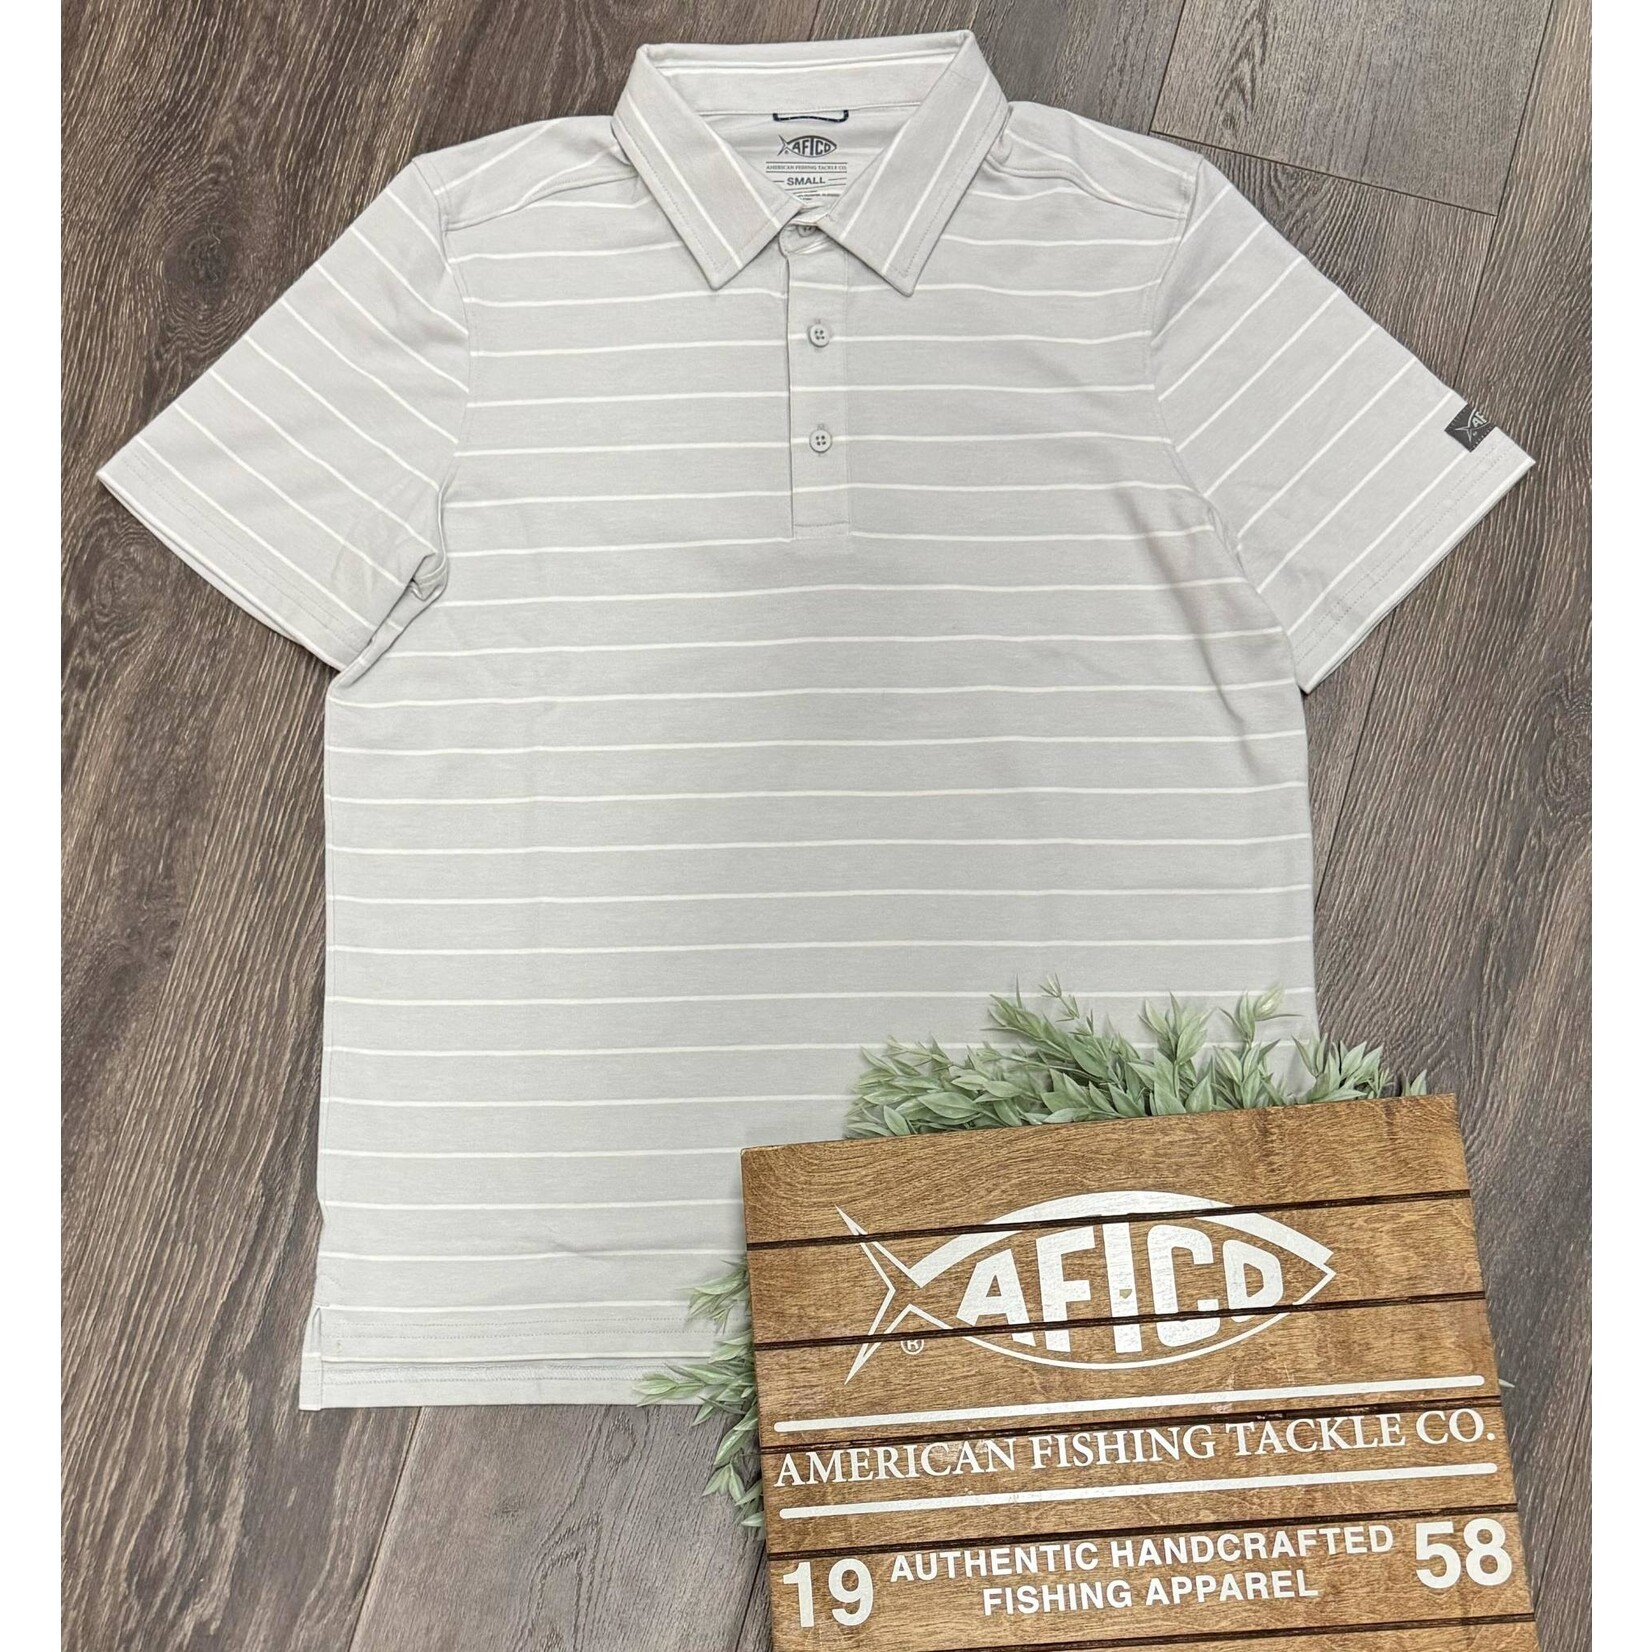 Aftco Aftco Men's Butterfish Polo Shirt